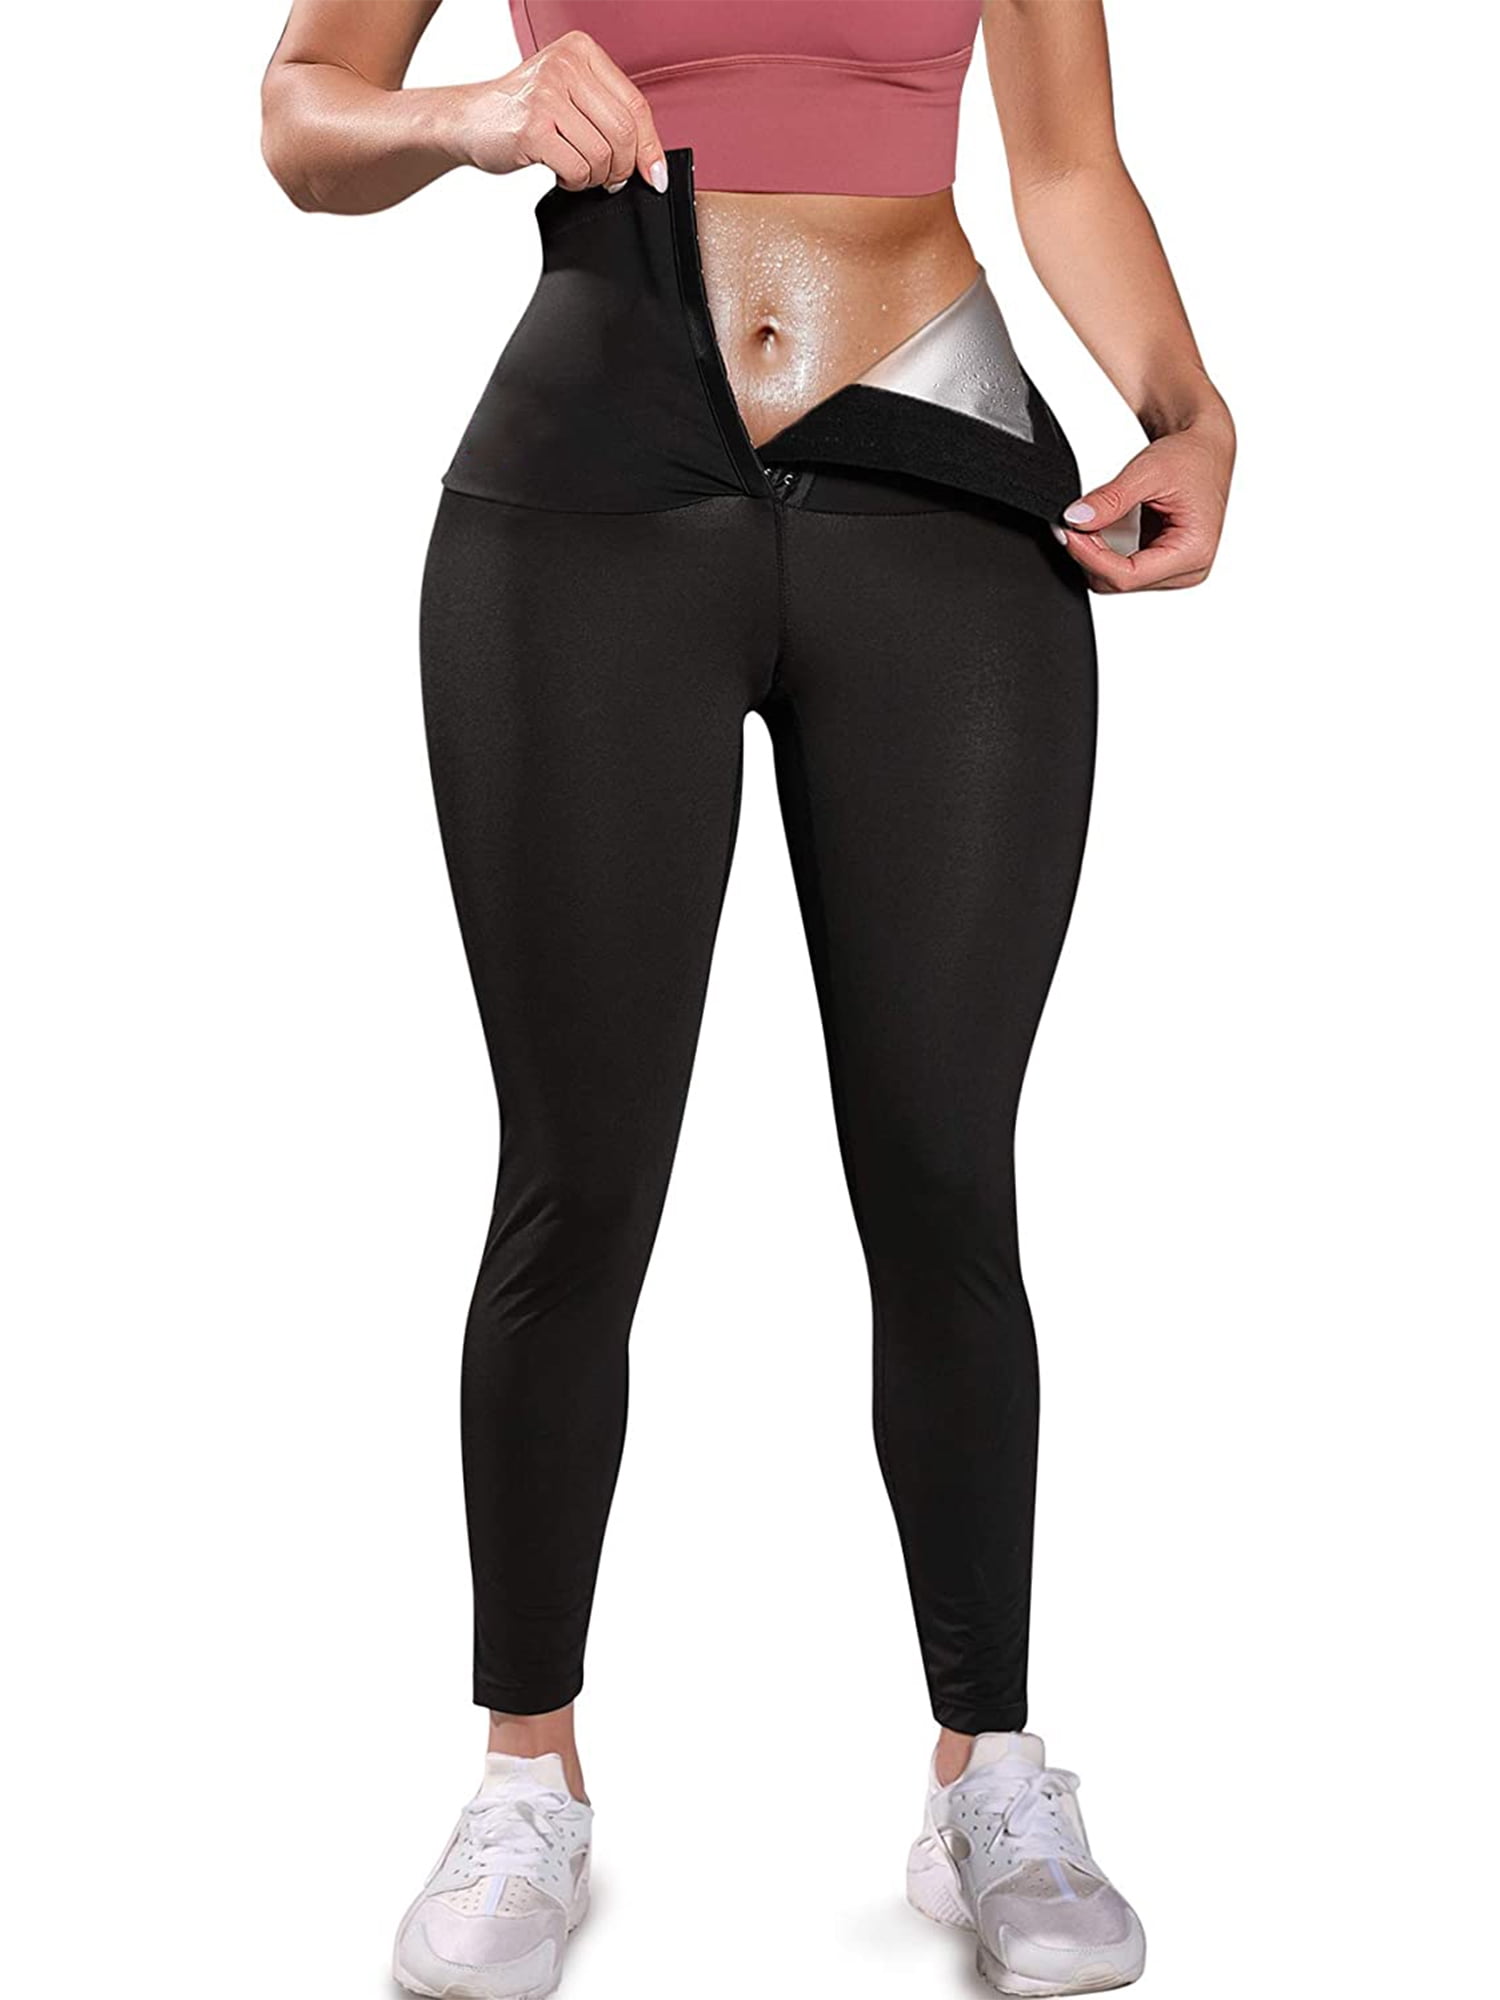 Lilvigor Sauna Leggings for Women Sweat Pants High Waist Compression  Slimming Hot Thermo Workout Training Capris Body Shaper